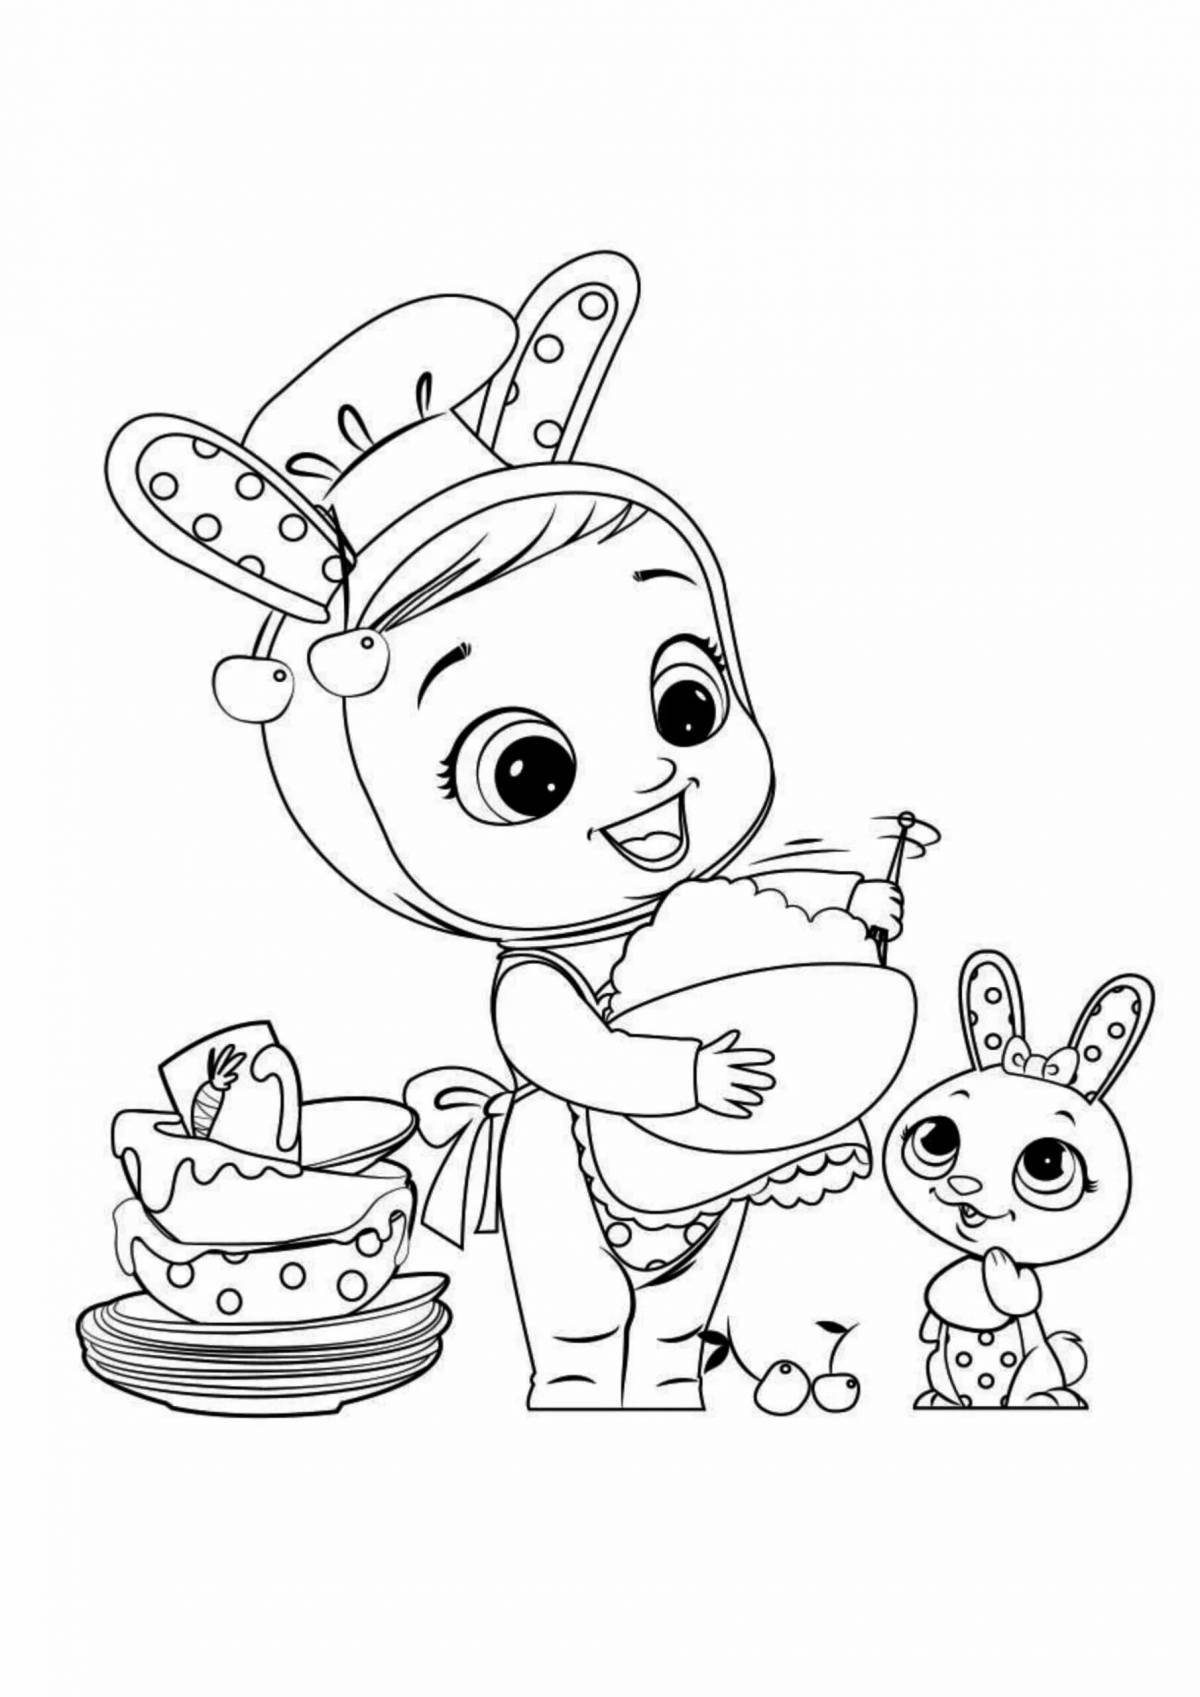 Baby's edge magic coloring book for kids